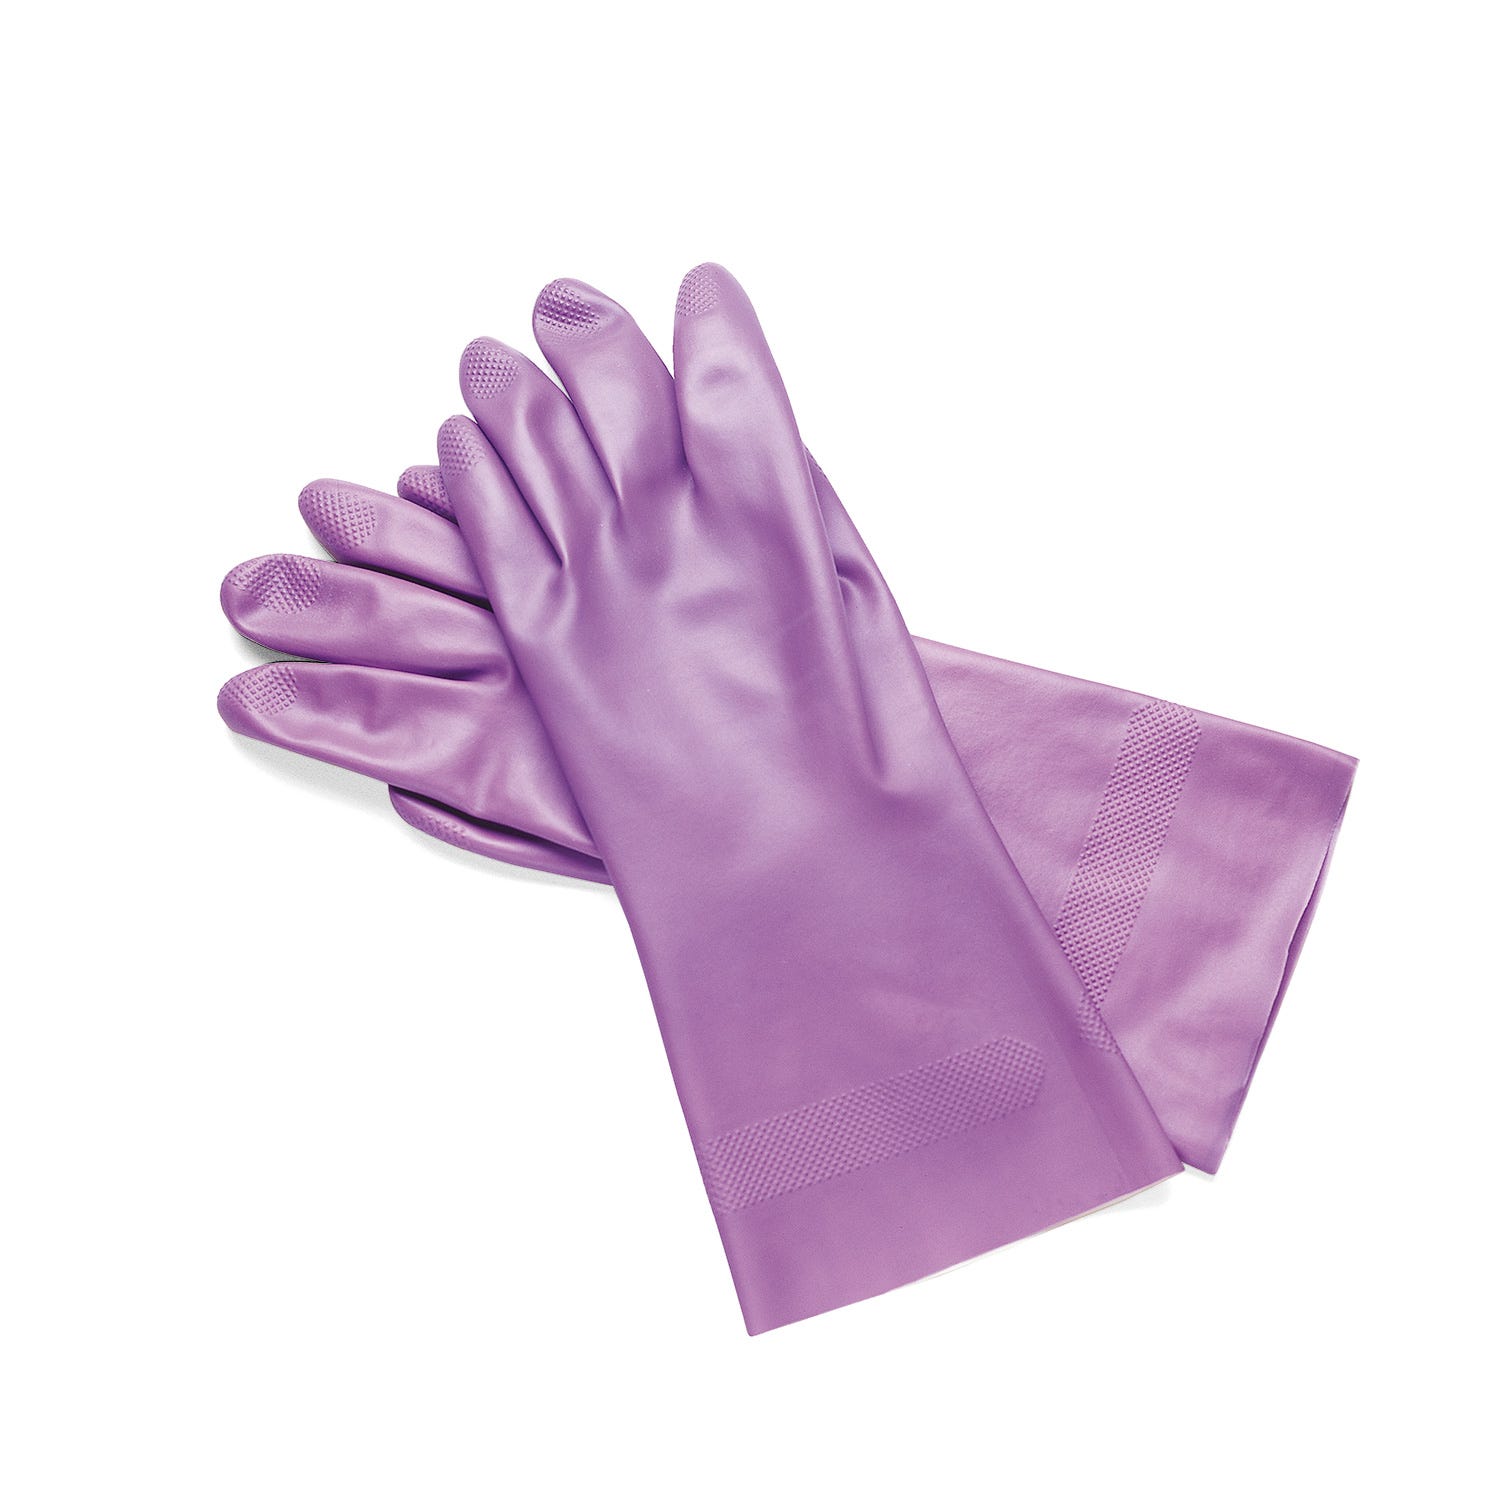 Glove Nitrile Utility Large, Size 9, Lilac - 3prs/Pack